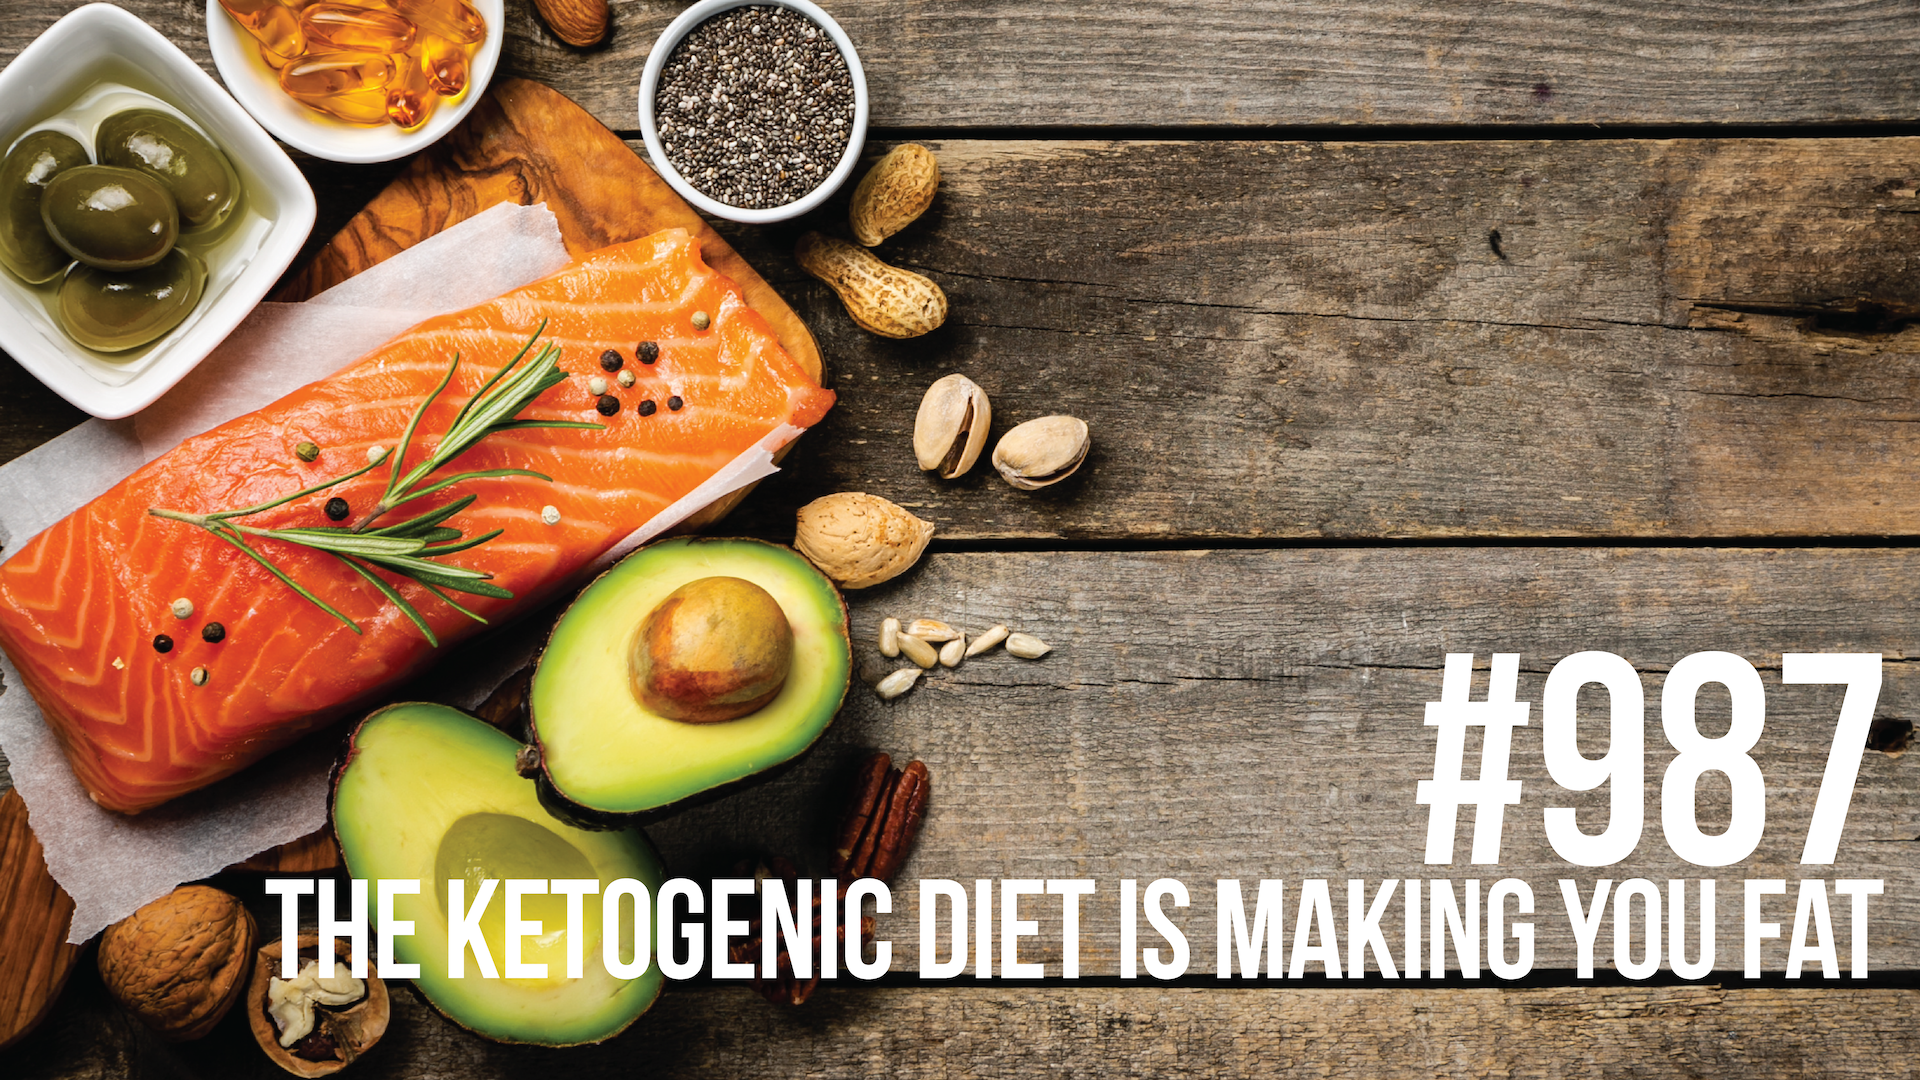 987: The Ketogenic Diet is Making You Fat